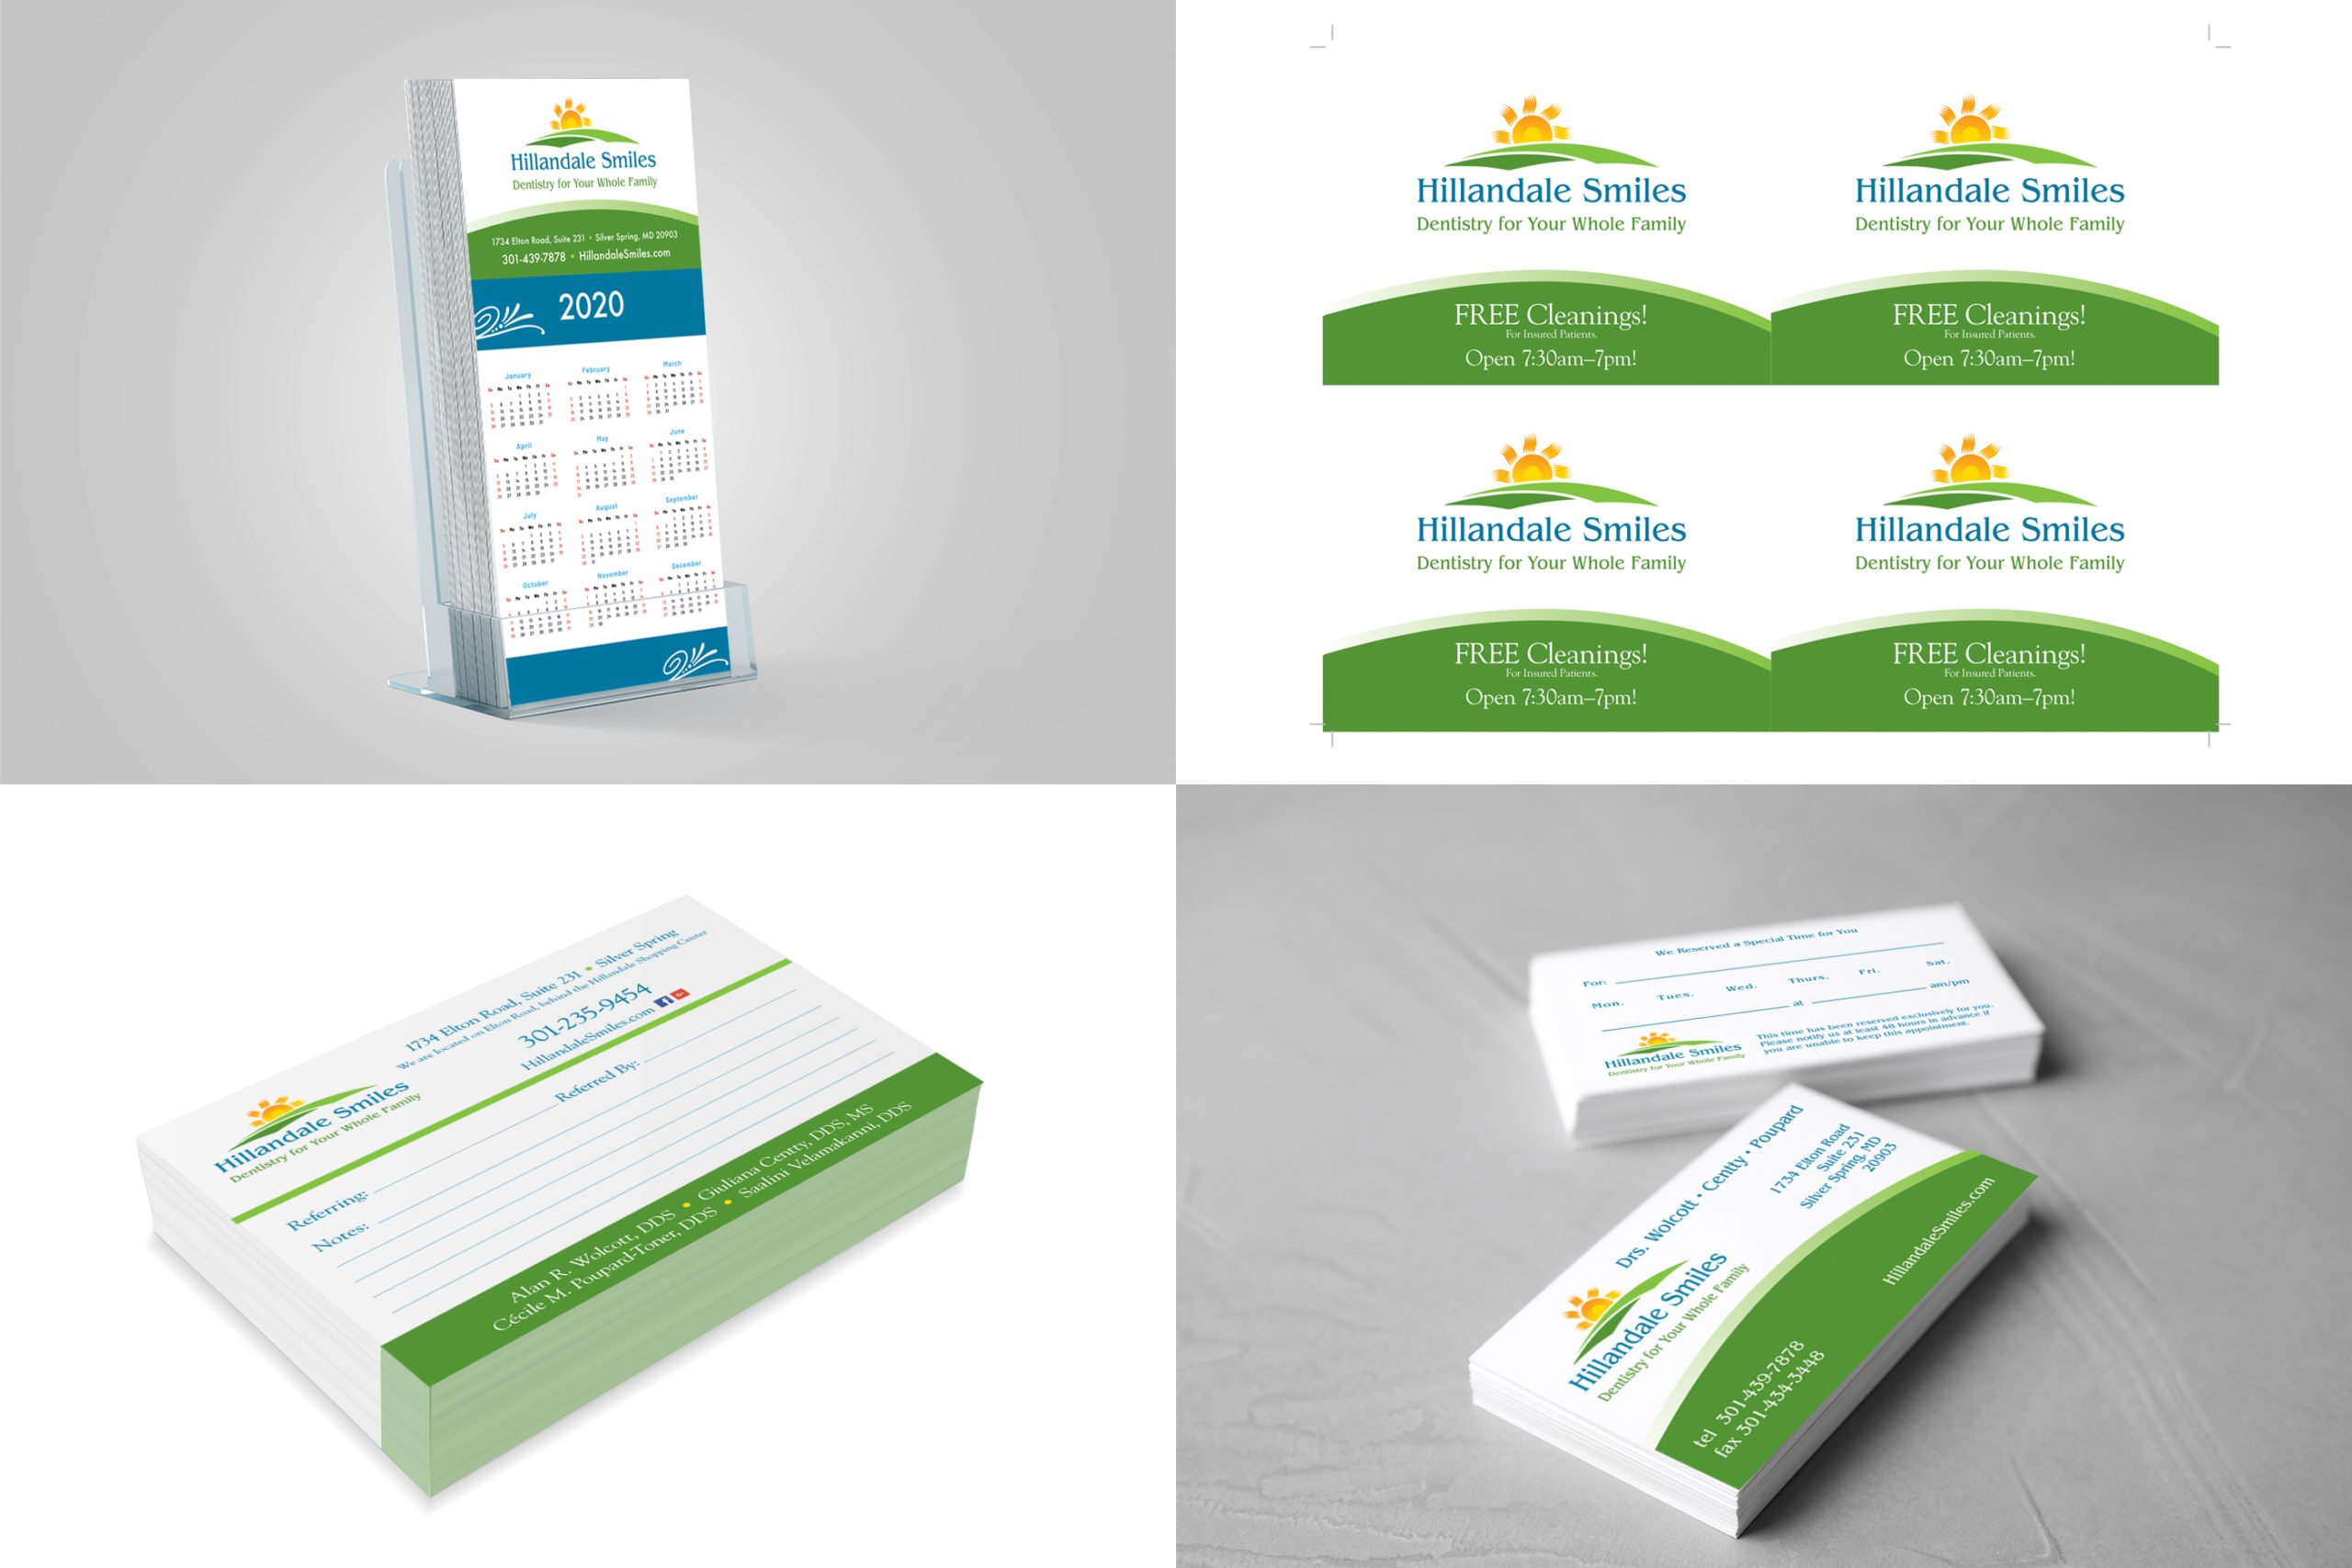 Hillandale Smiles Stationery & Promotional Items